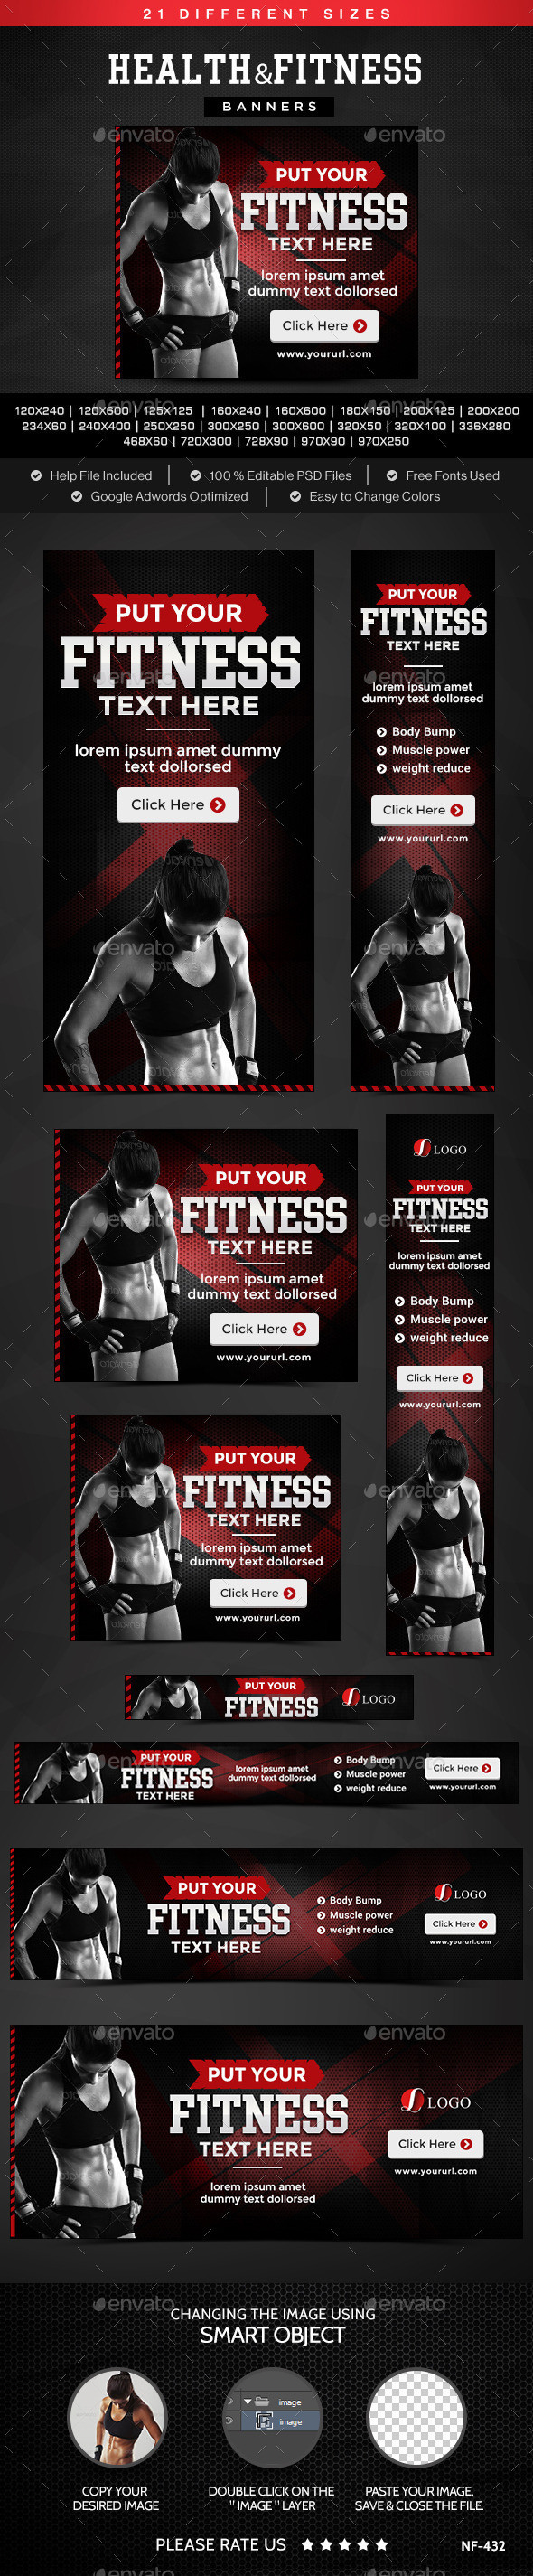 Nf 432 helth fitness 20banners preview